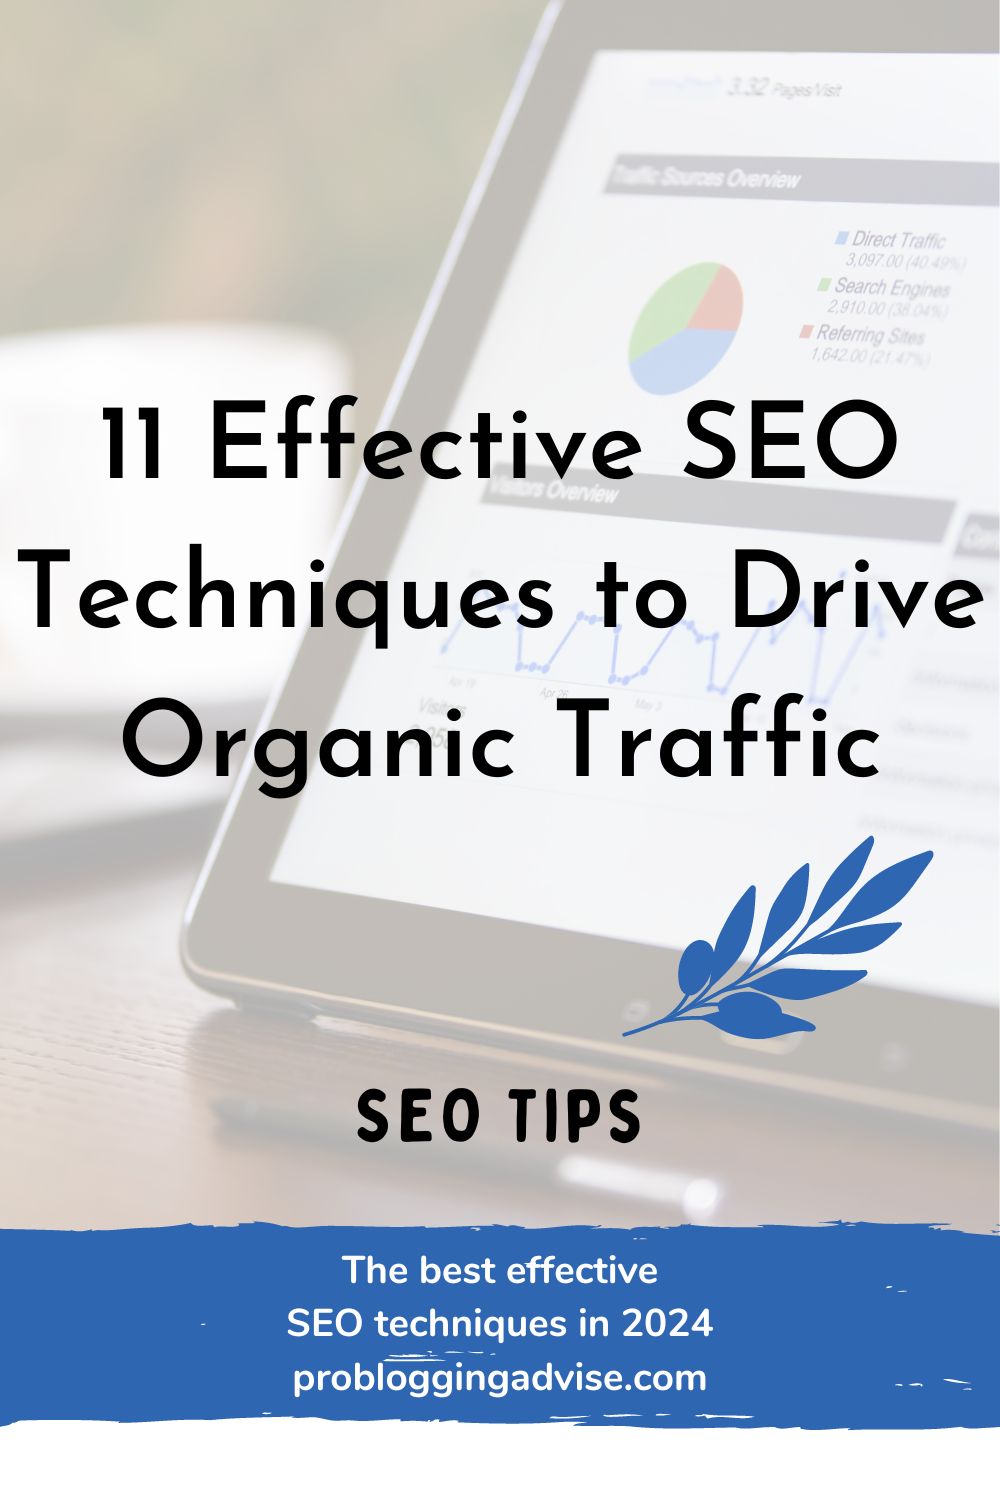 11 Effective SEO Techniques to Drive Organic Traffic